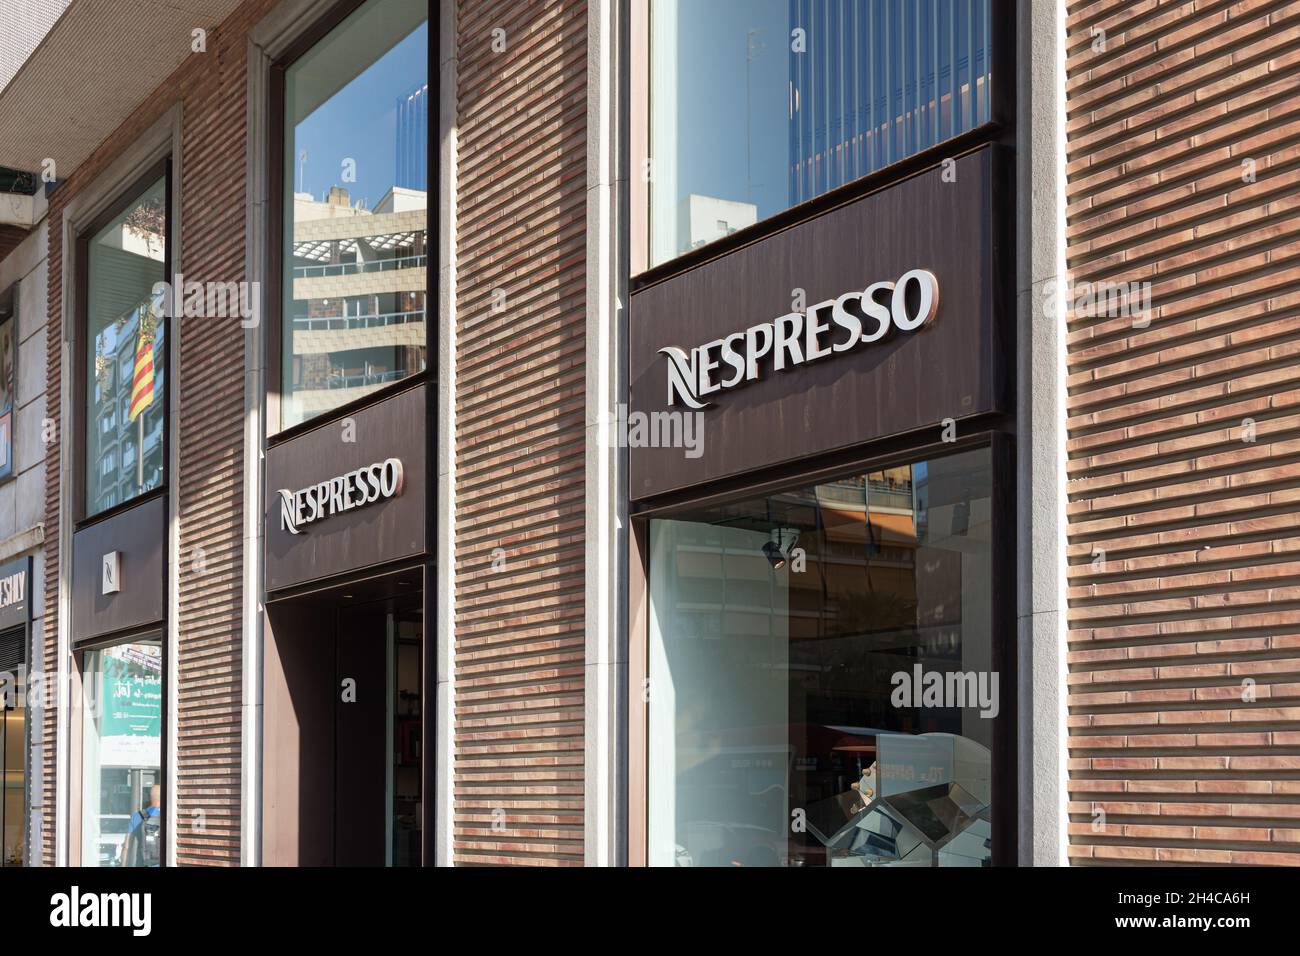 VALENCIA, SPAIN - OCTOBER 26, 2021: Nespresso is an operating unit of the Nestlé Group. It sells coffee capsules and coffee machines Stock Photo